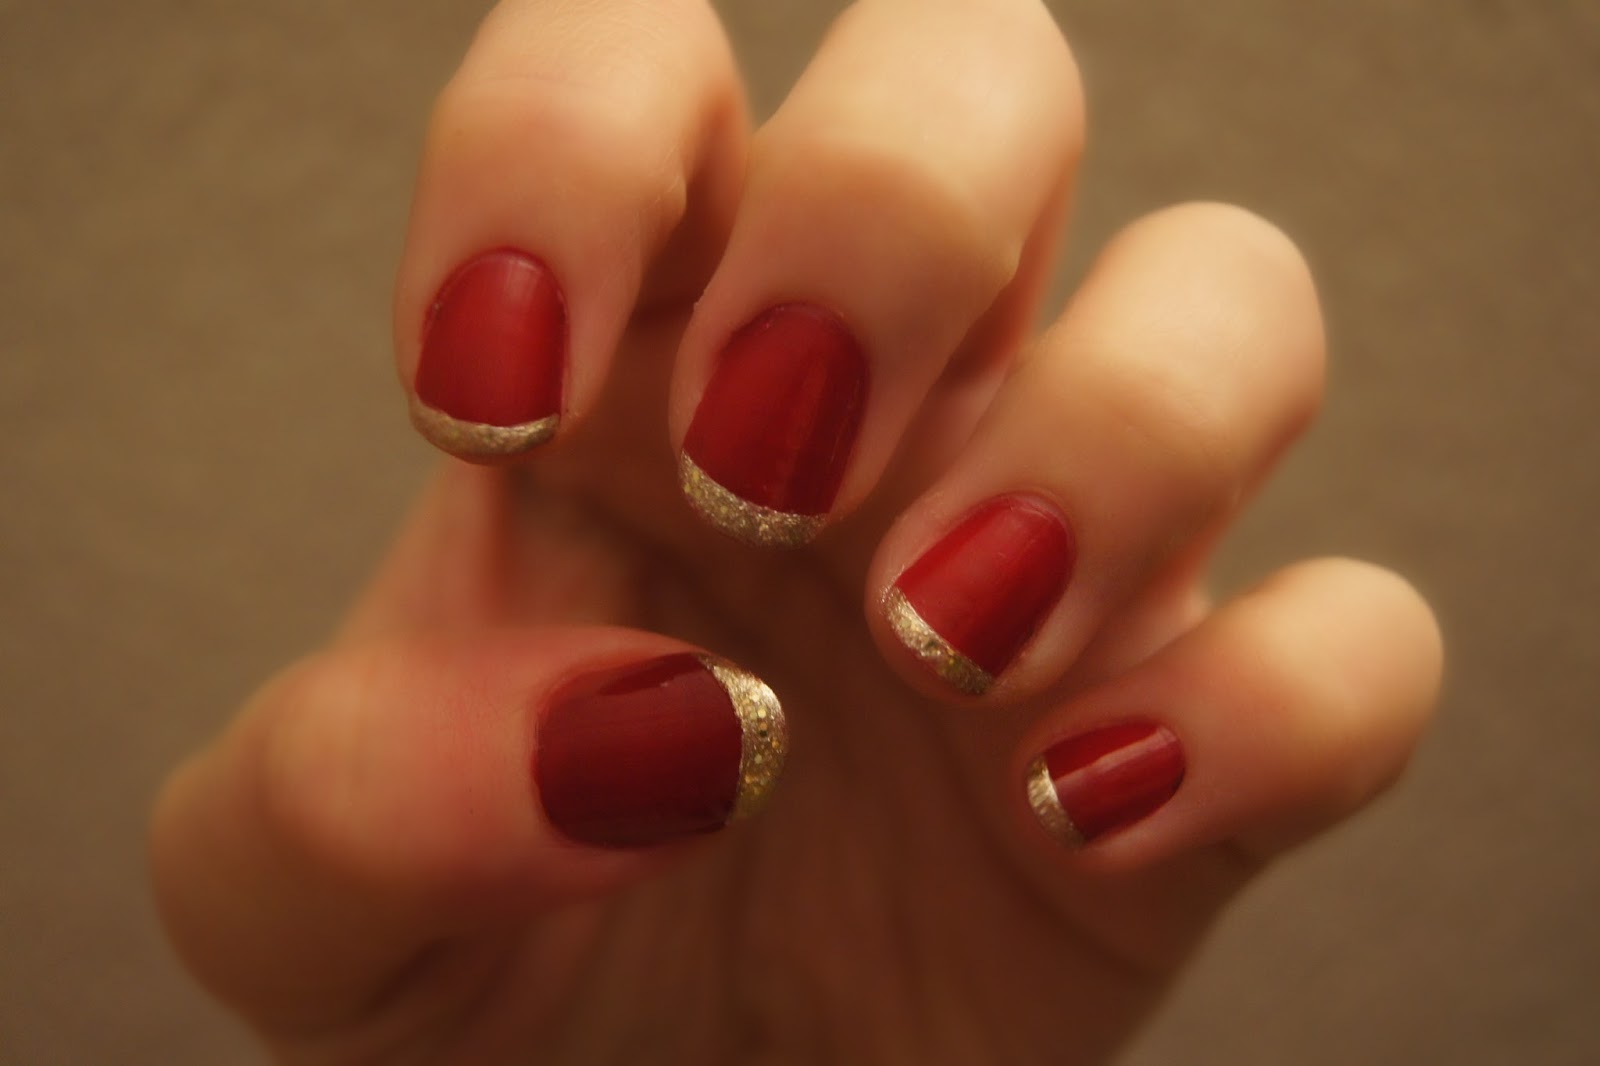 5. "Red and Gold French Manicure for the Holidays" - wide 9